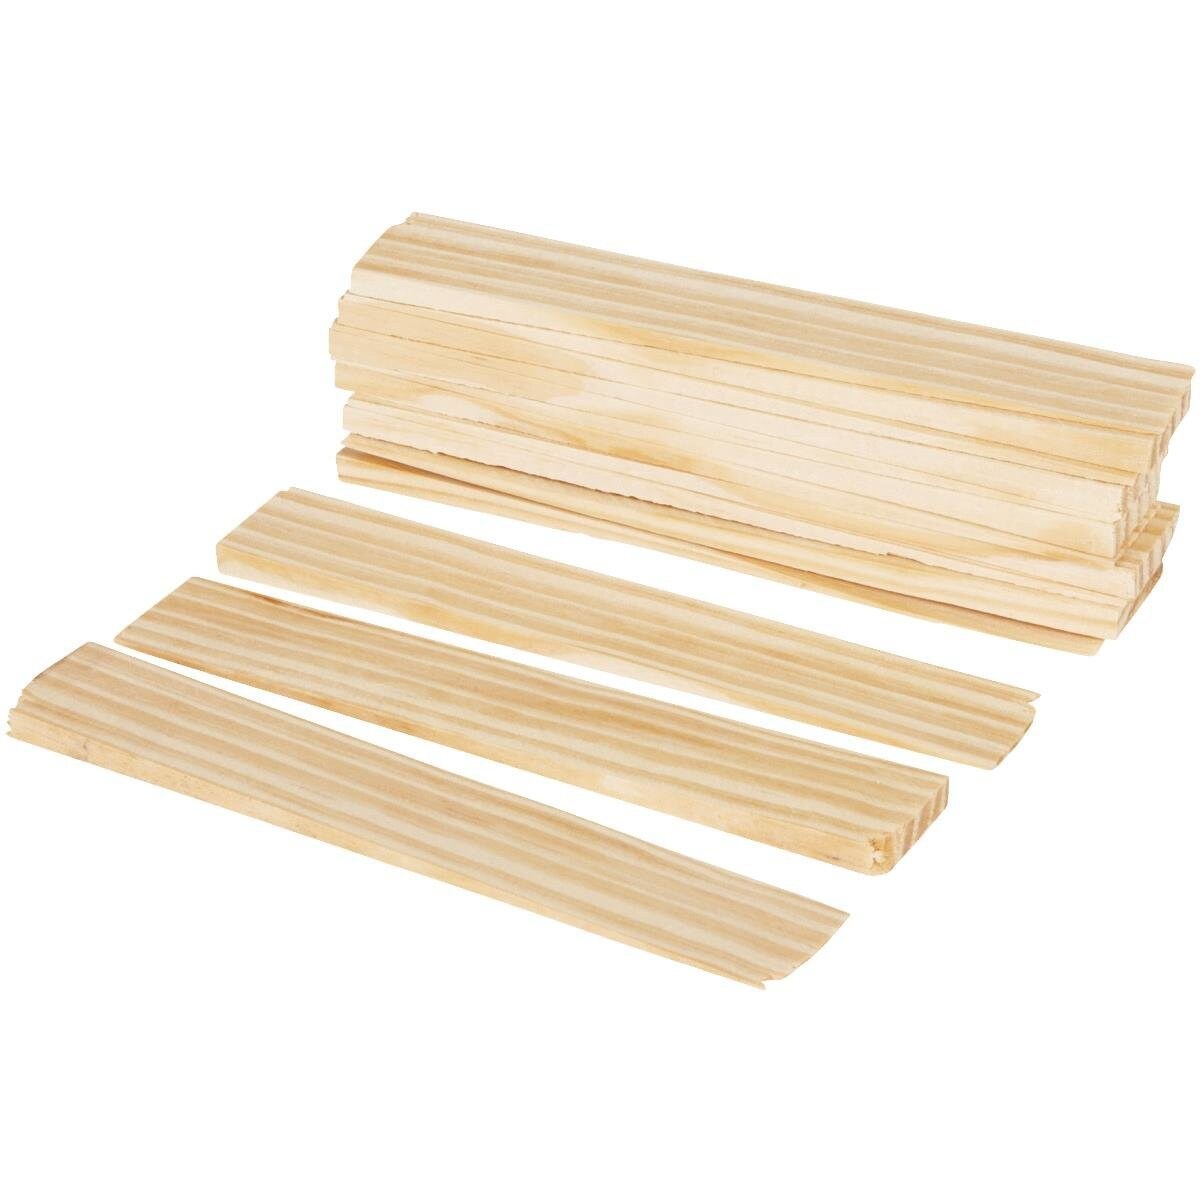 8 in. Wood Shims (12-Piece per Bundle) WSSHW08 - The Home Depot